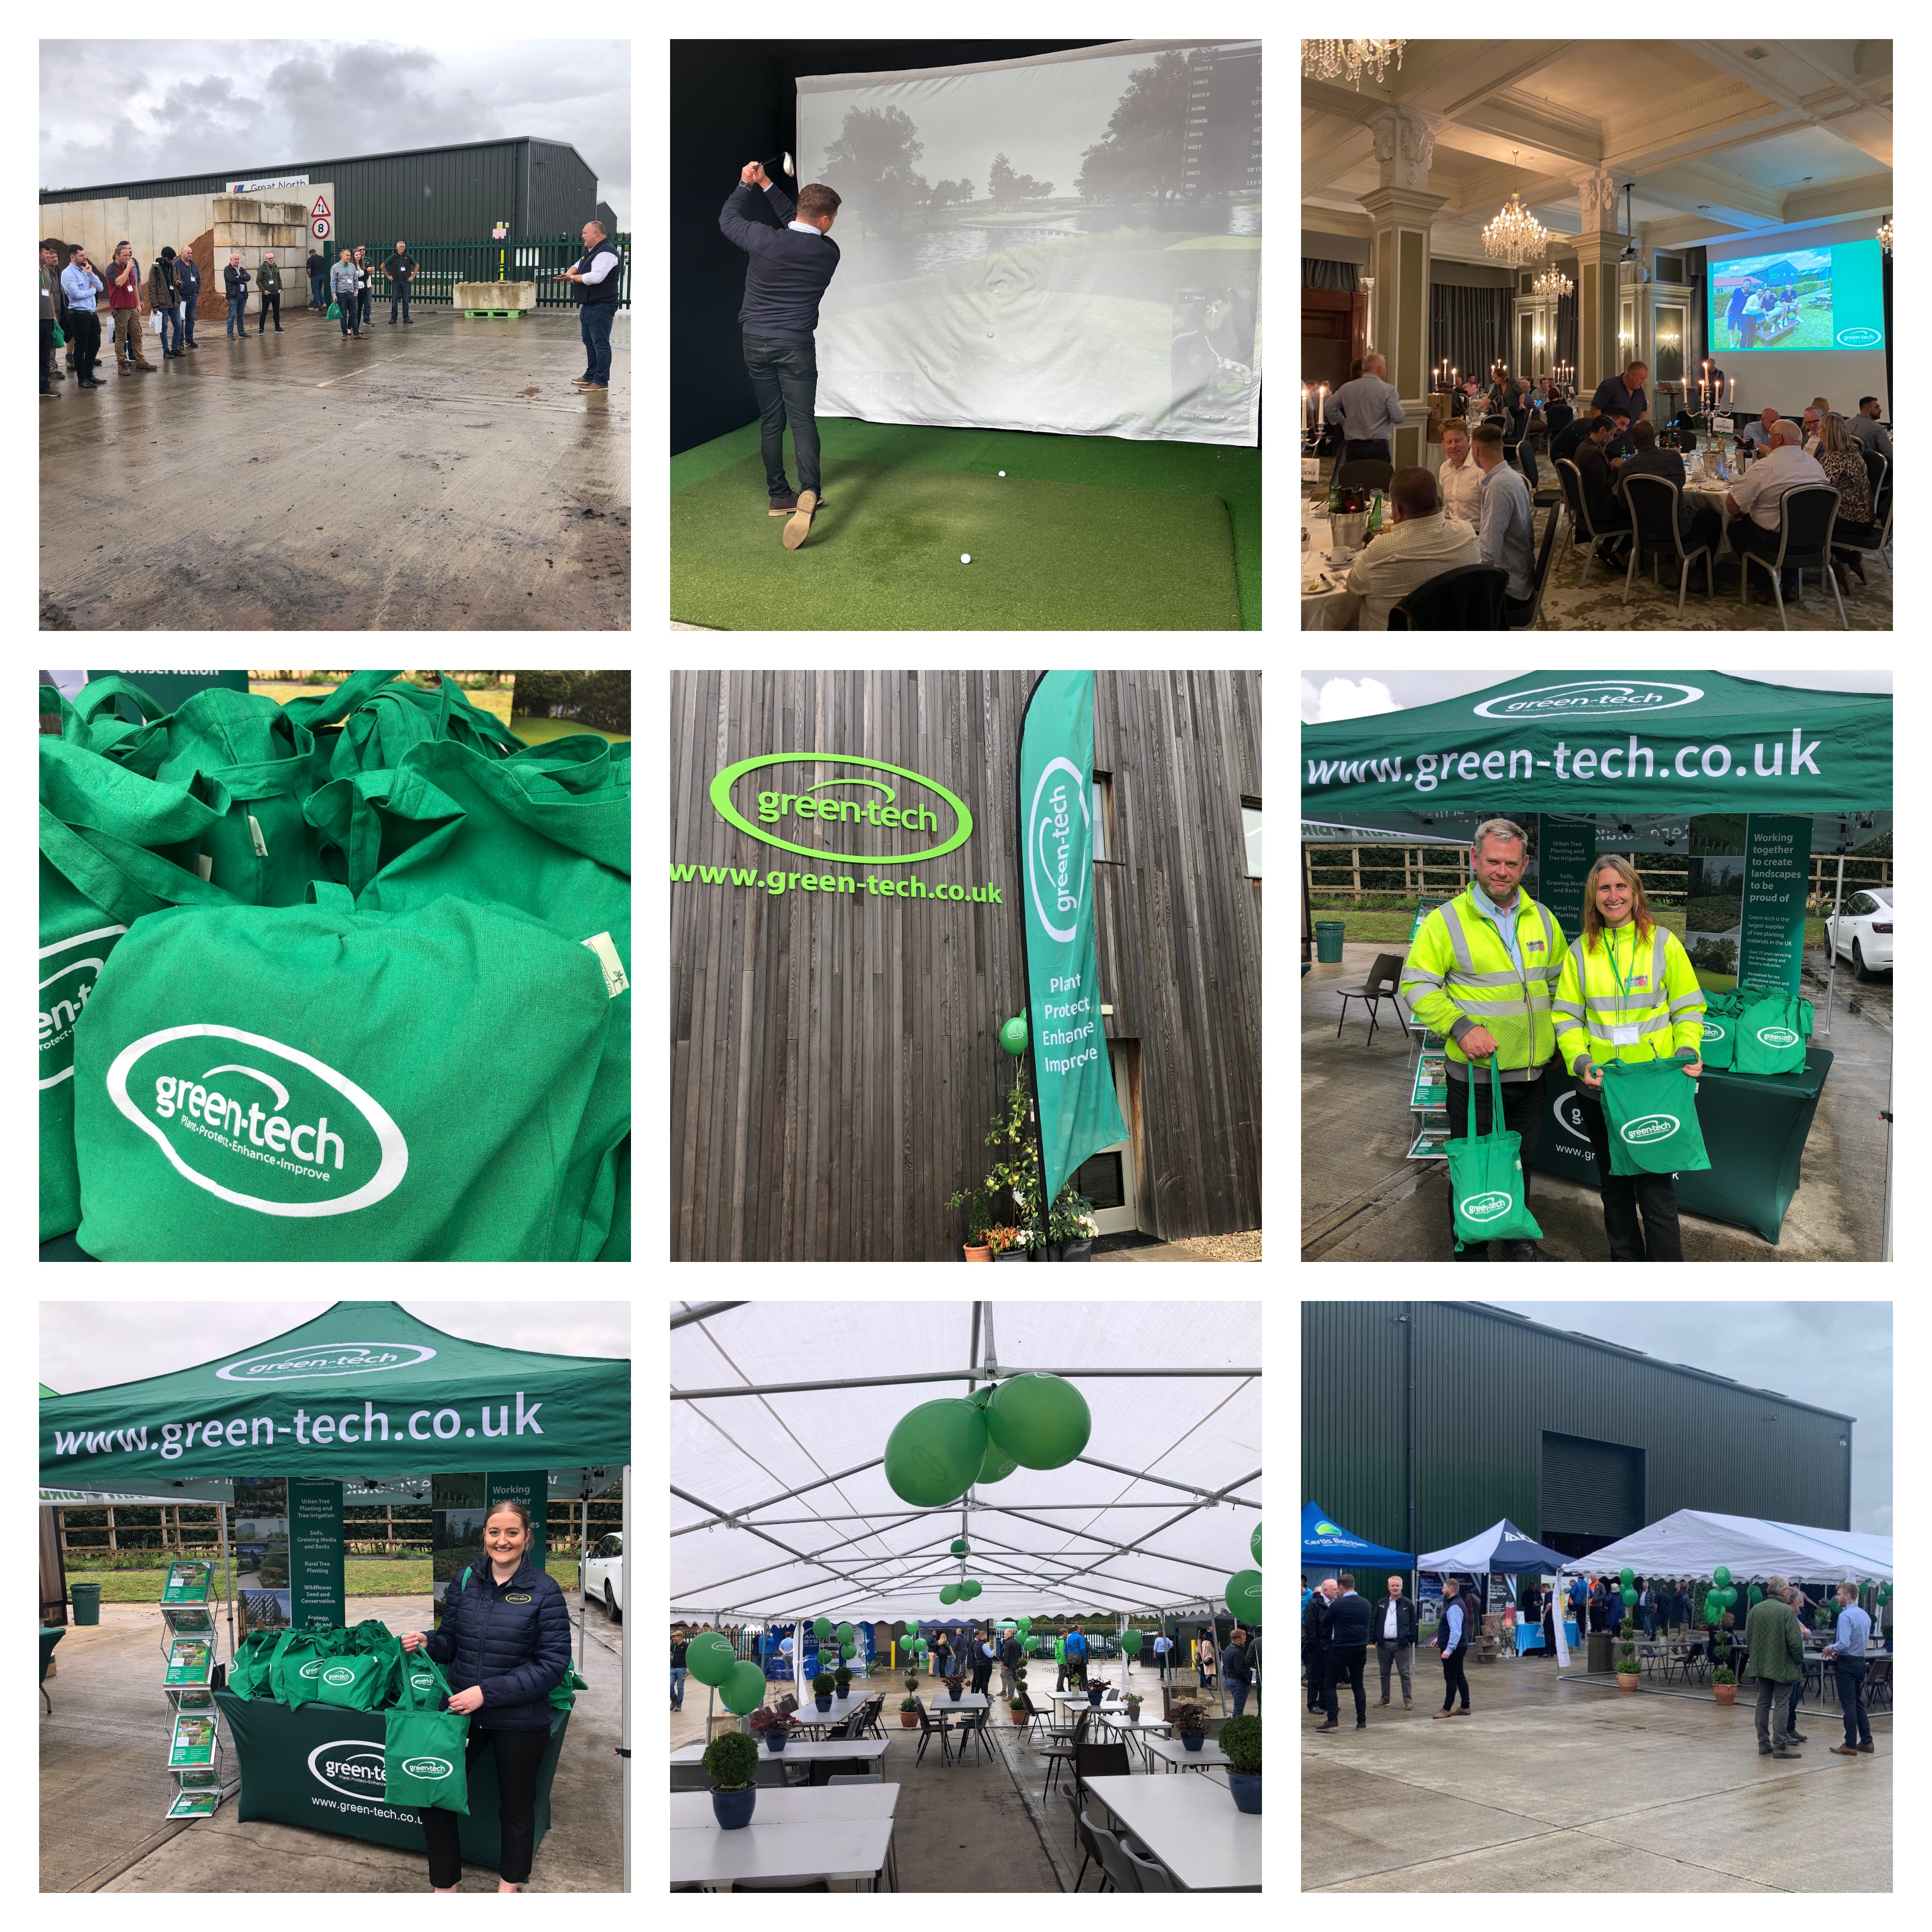 Green-tech Welcomes Over 150 Customers to Their Open Day